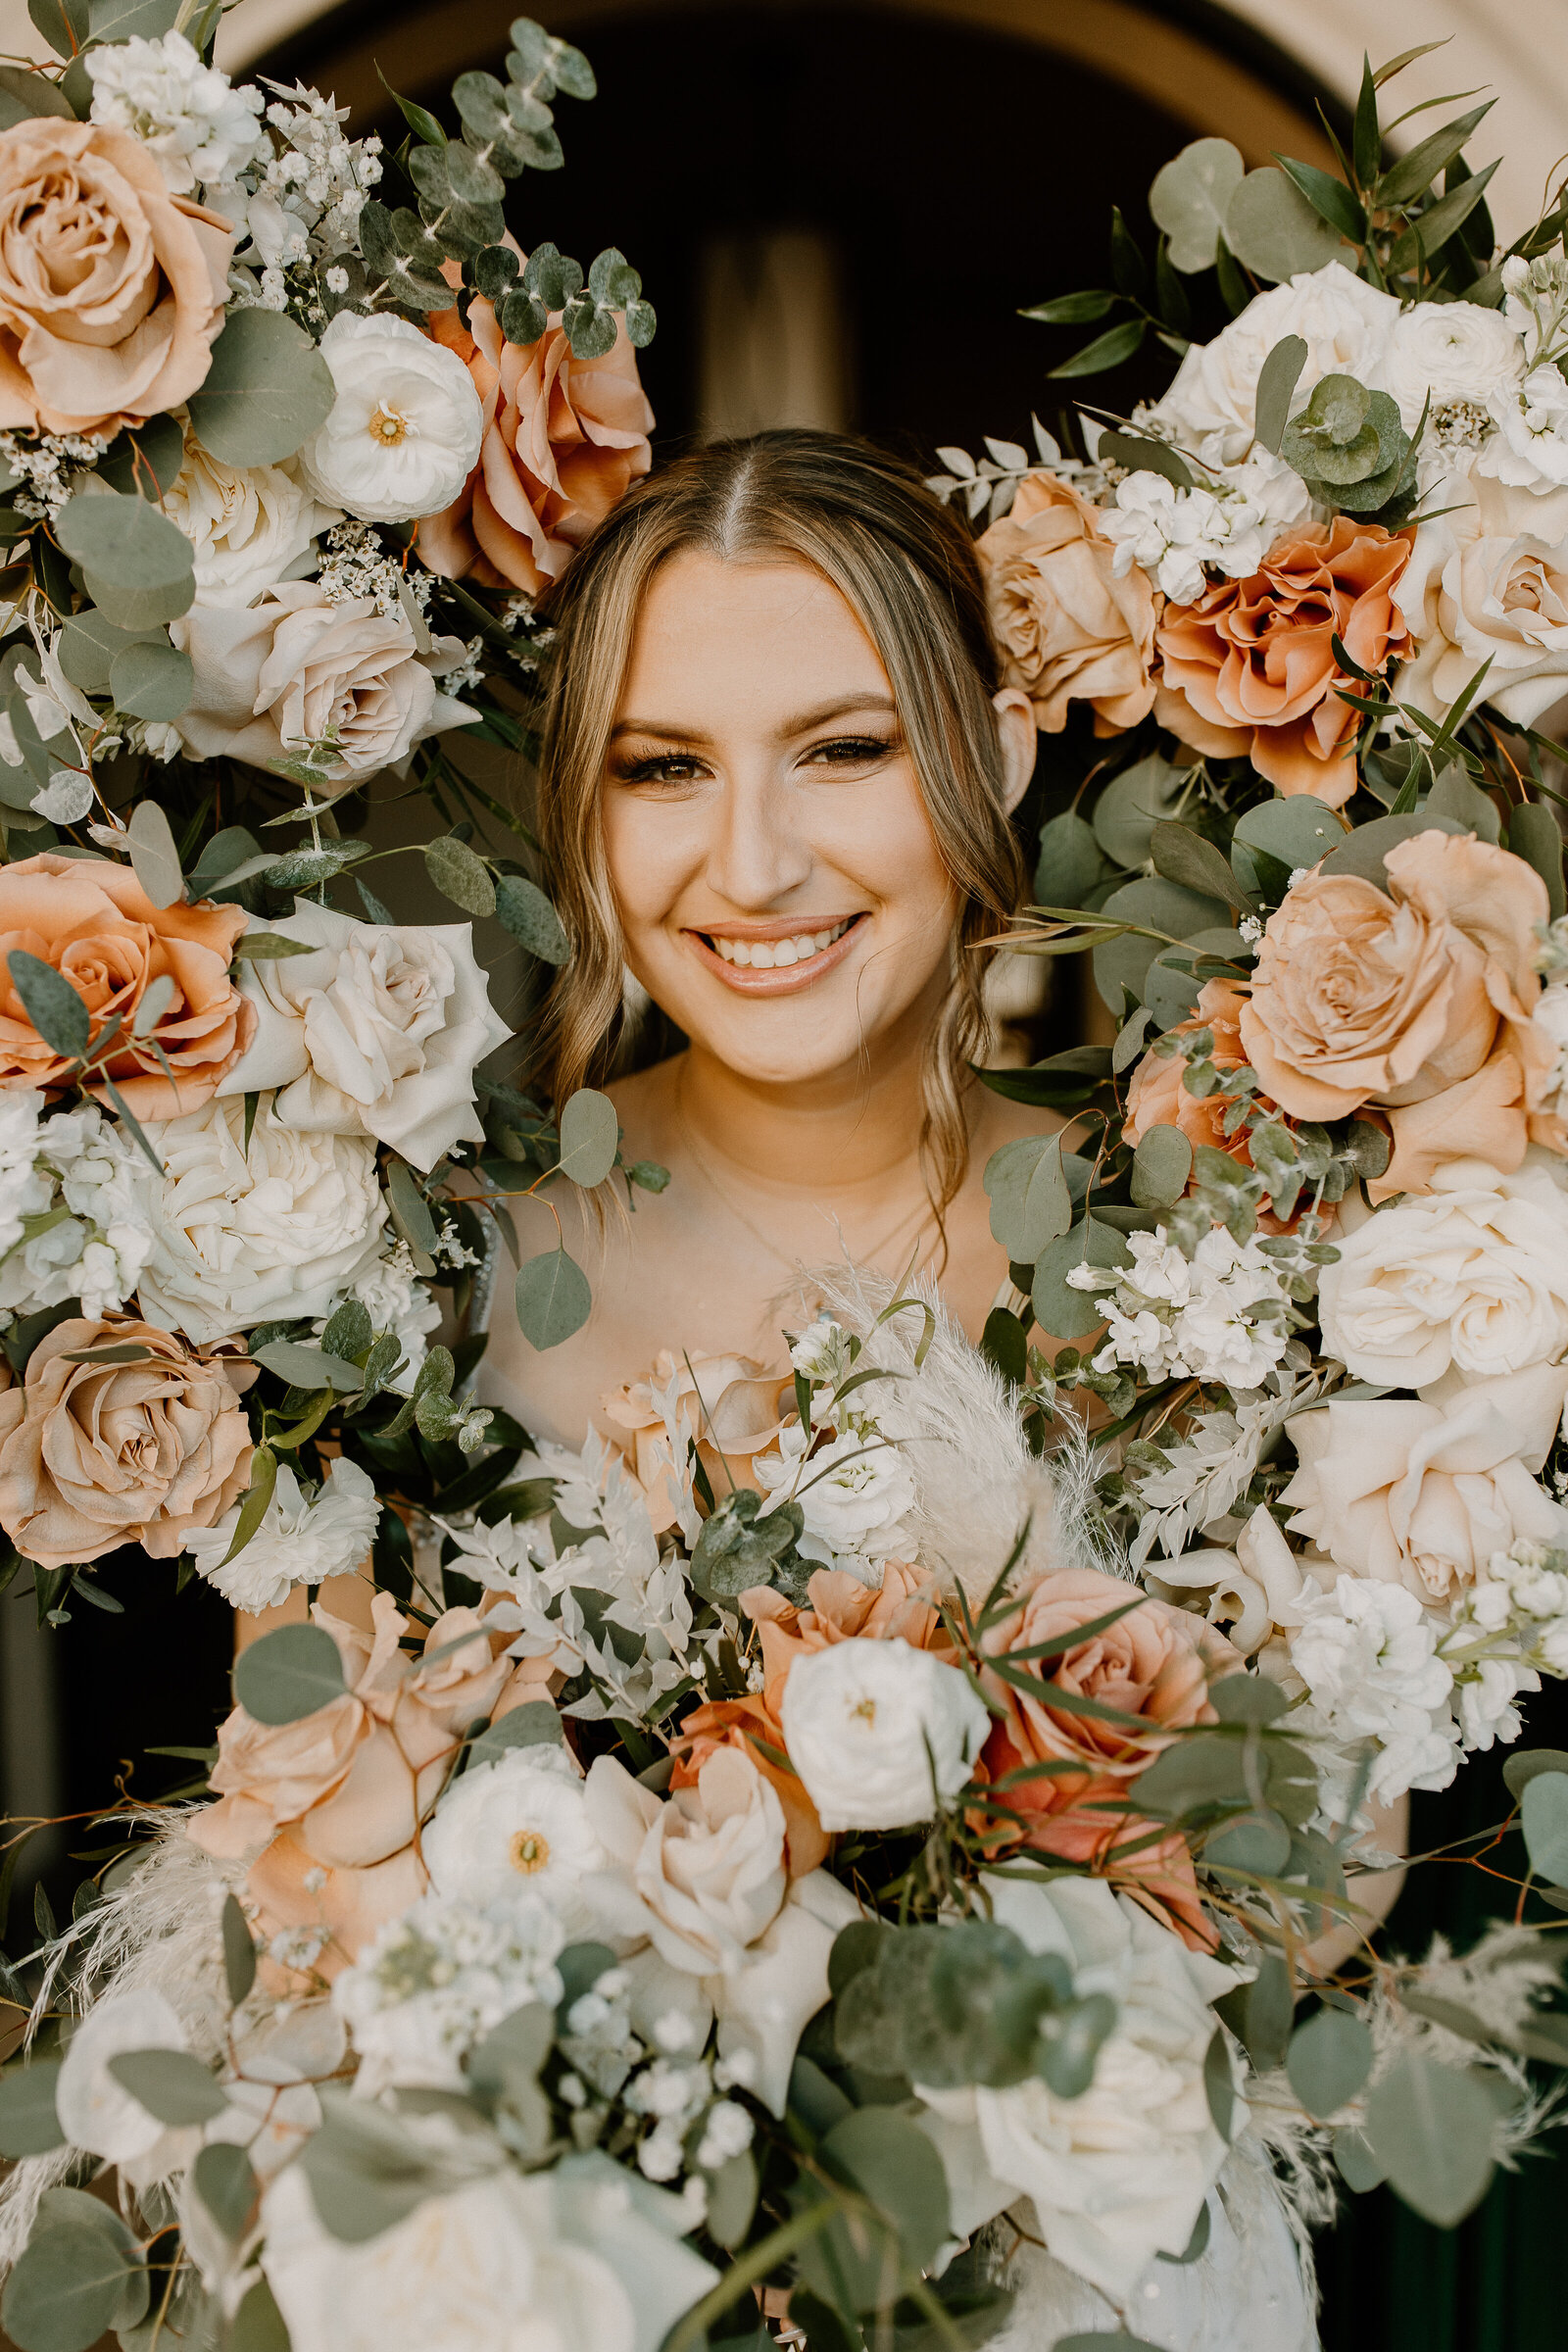 A bride smiling with bouquets of flowers all around her head.